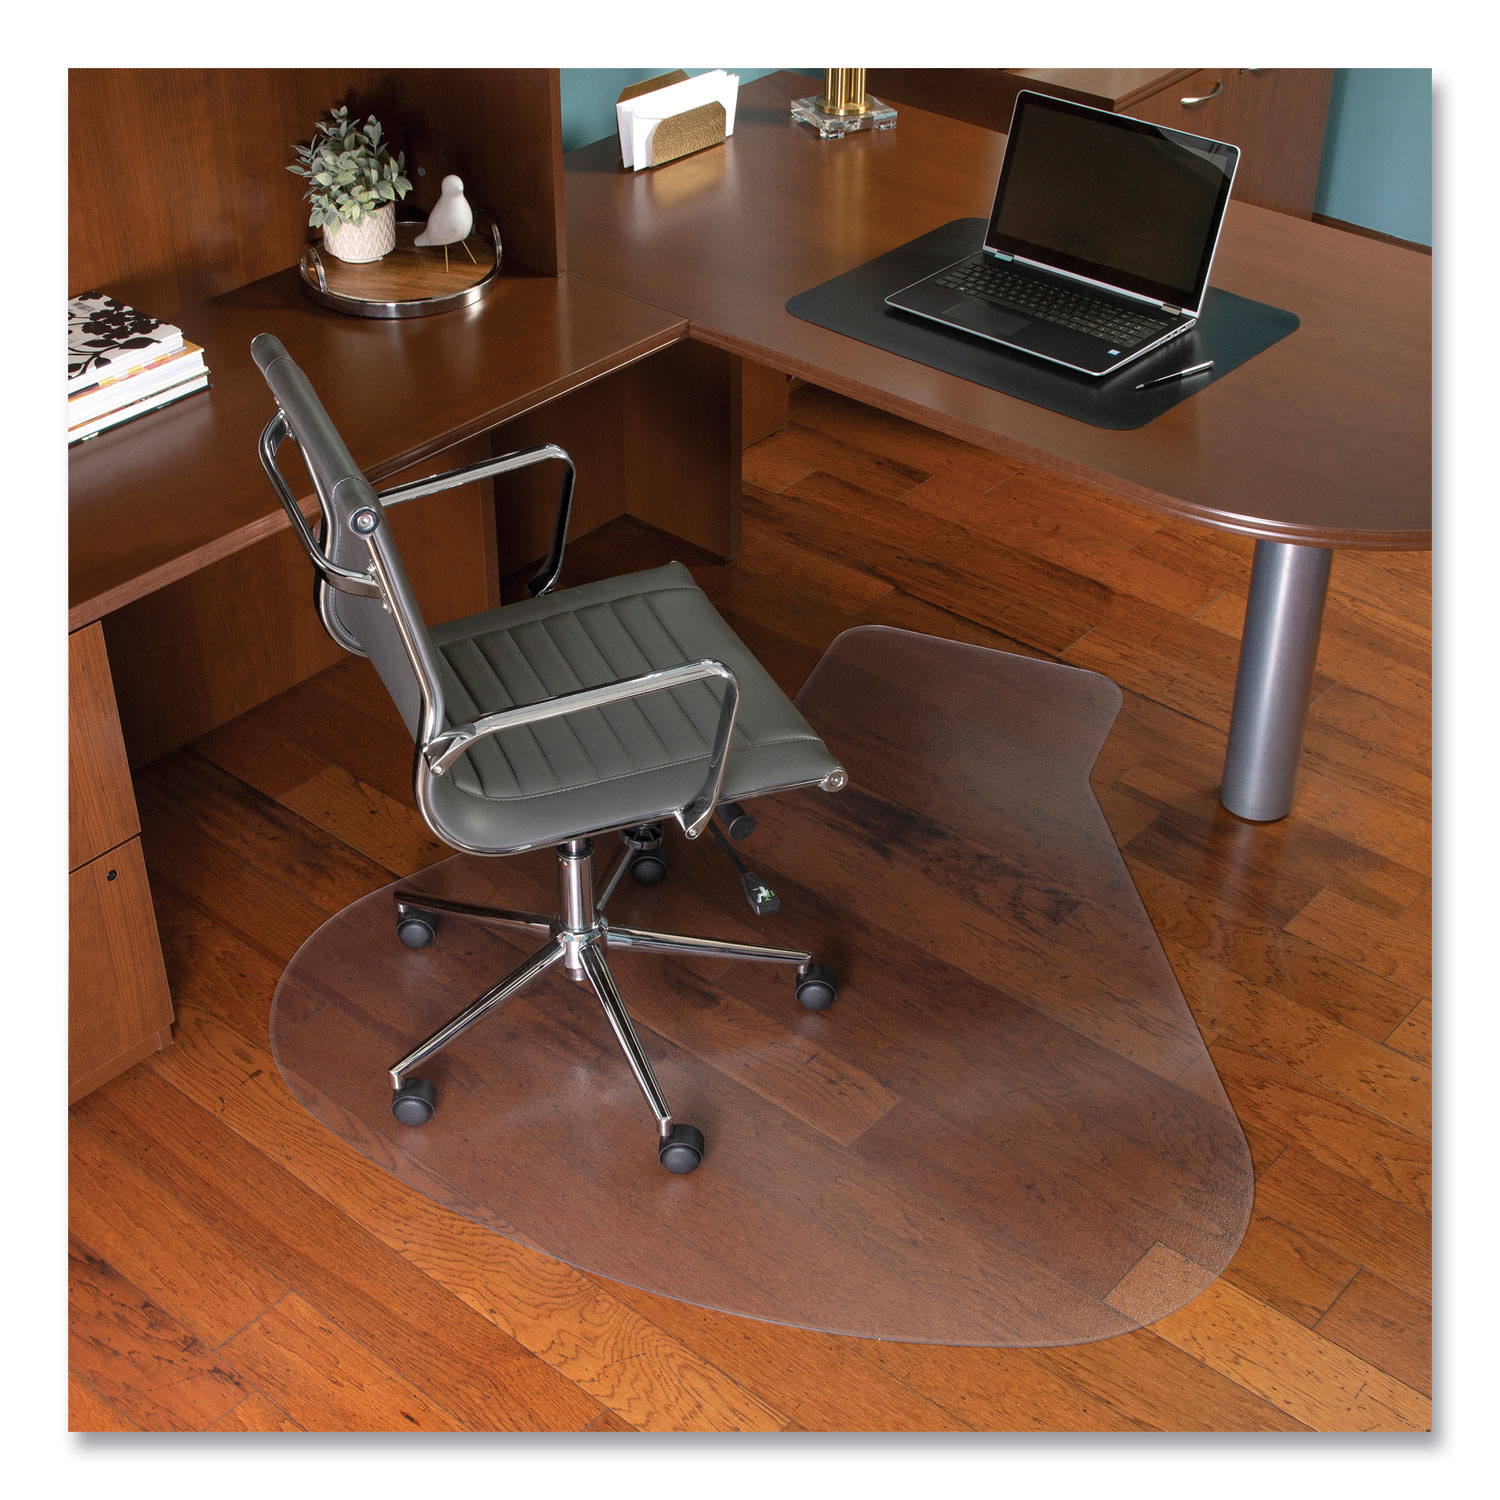  ES Robbins 132775 EverLife Workstation Chair Mat for Hard Floors, With Lip, 66 x 60, Clear (ESR132775) 